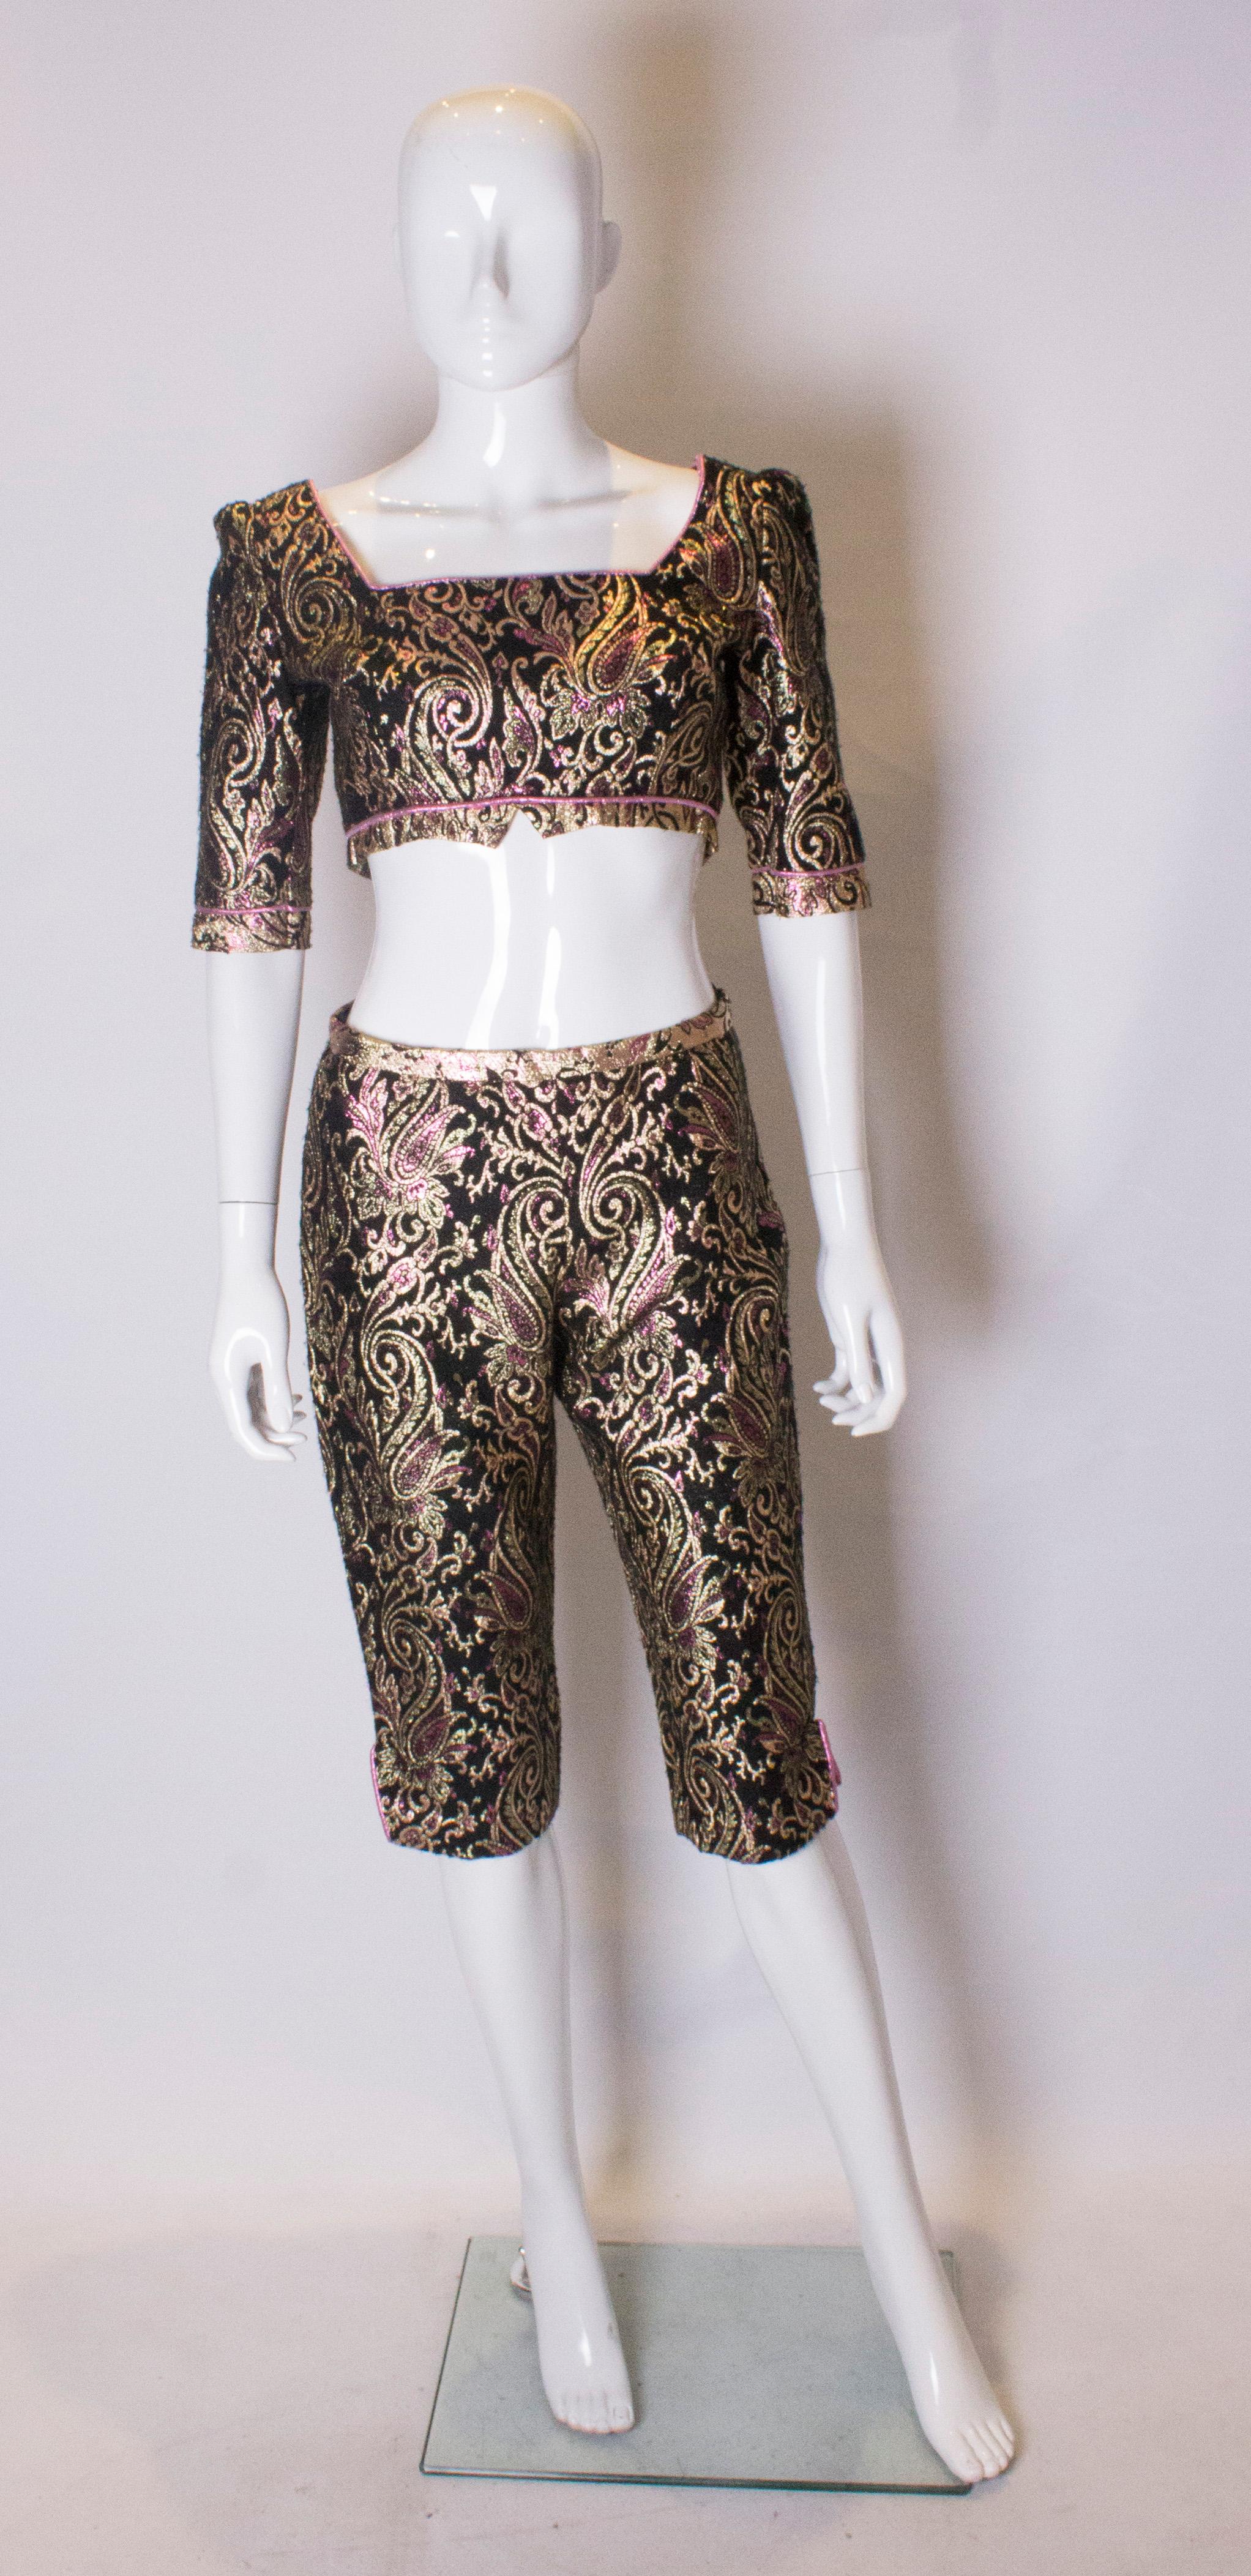 A chic pair of brocade shorts .They have a back zip and are fully lined
Measurements waist 28'',  hips 37'', inside leg 17''